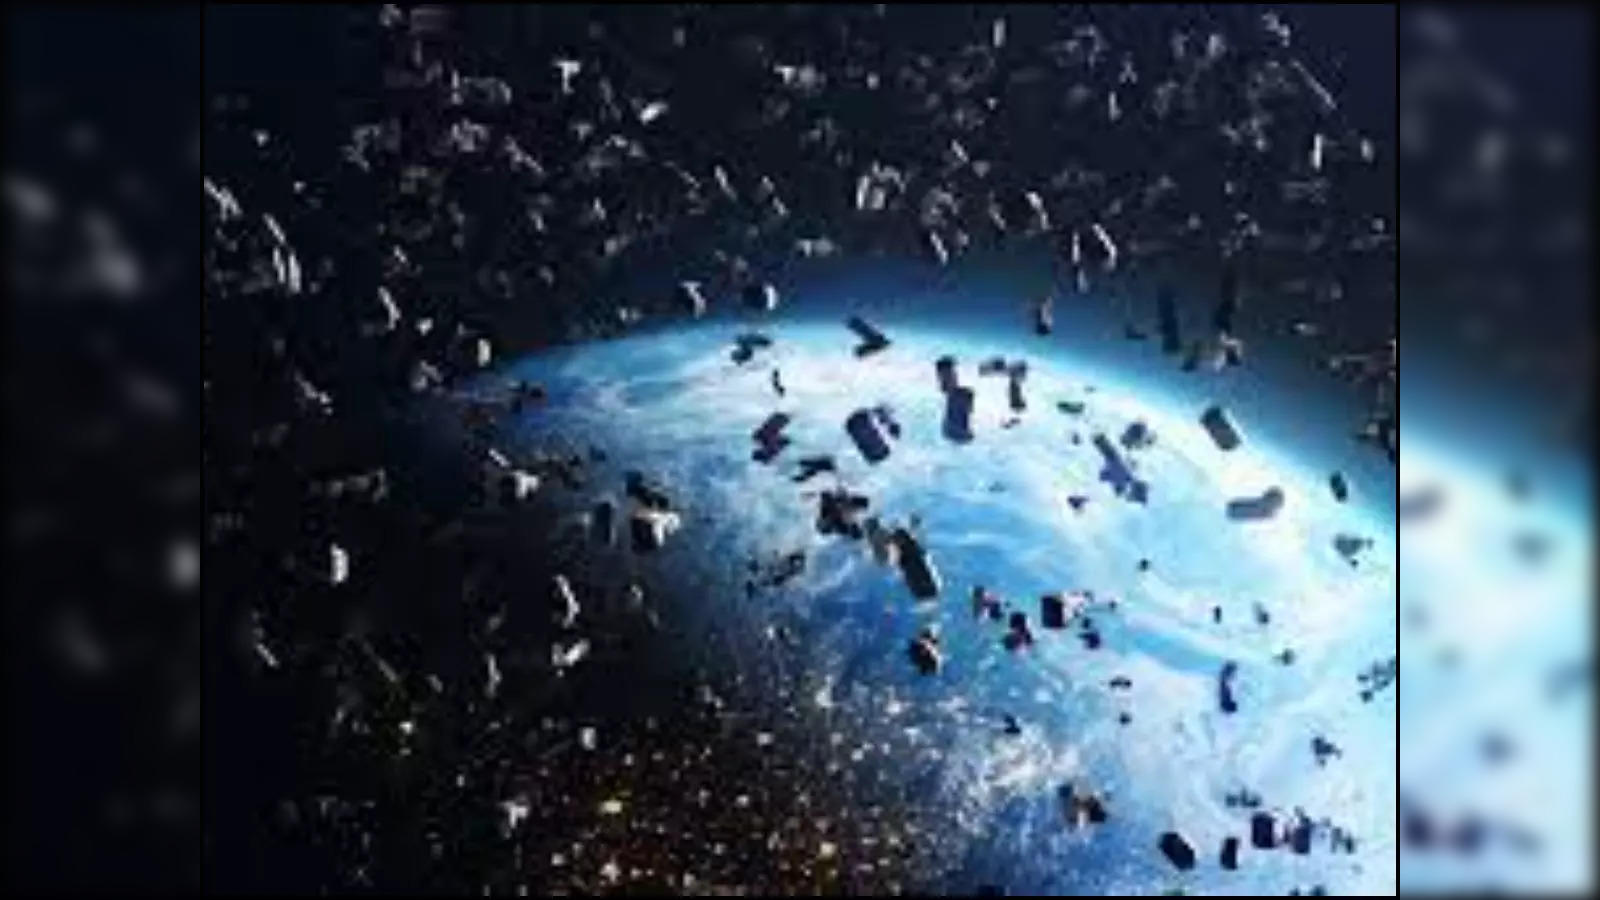 space debris: Will space debris fall on the Earth and hit humans